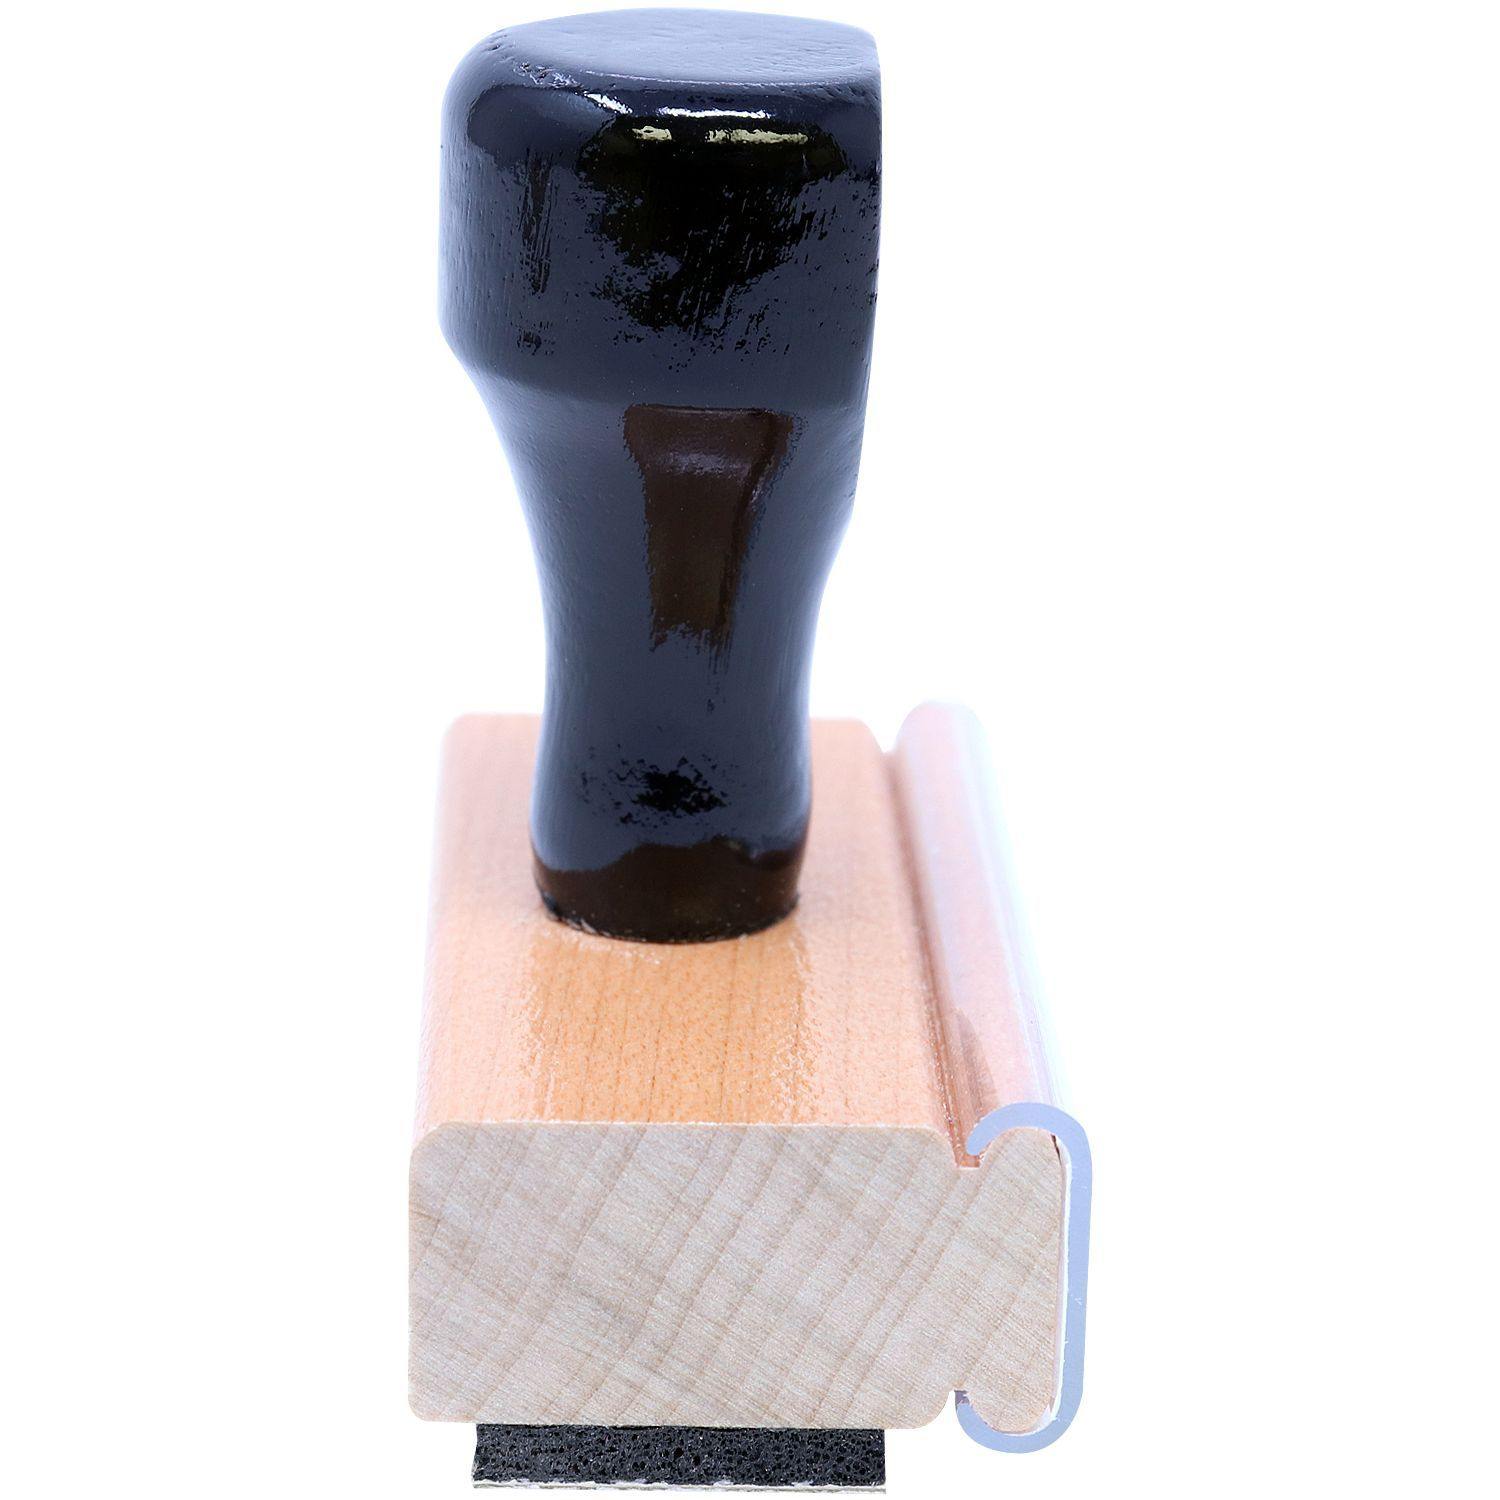 Restricted Delivery Rubber Stamp - Engineer Seal Stamps - Brand_Acorn, Impression Size_Small, Stamp Type_Regular Stamp, Type of Use_Postal & Mailing, Type of Use_Shipping & Receiving